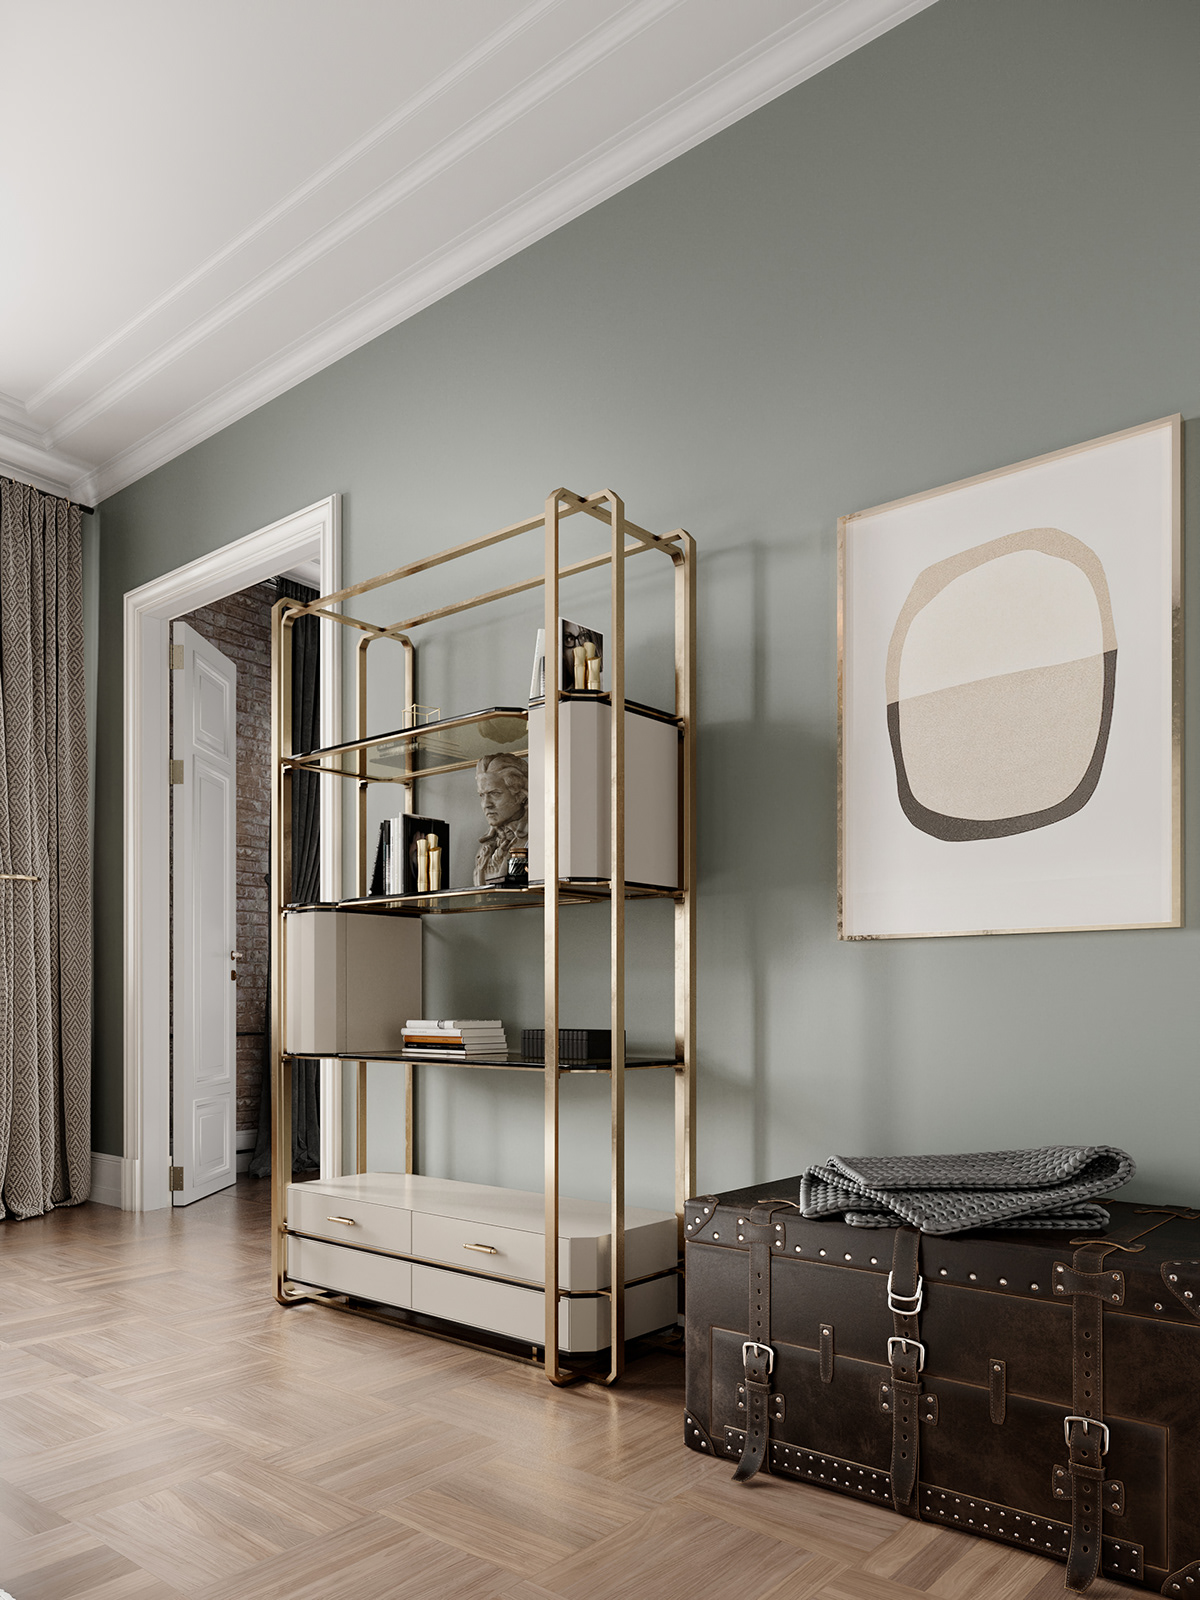 Copper gold stainless steel bookshelf with a simple but luxurious design.